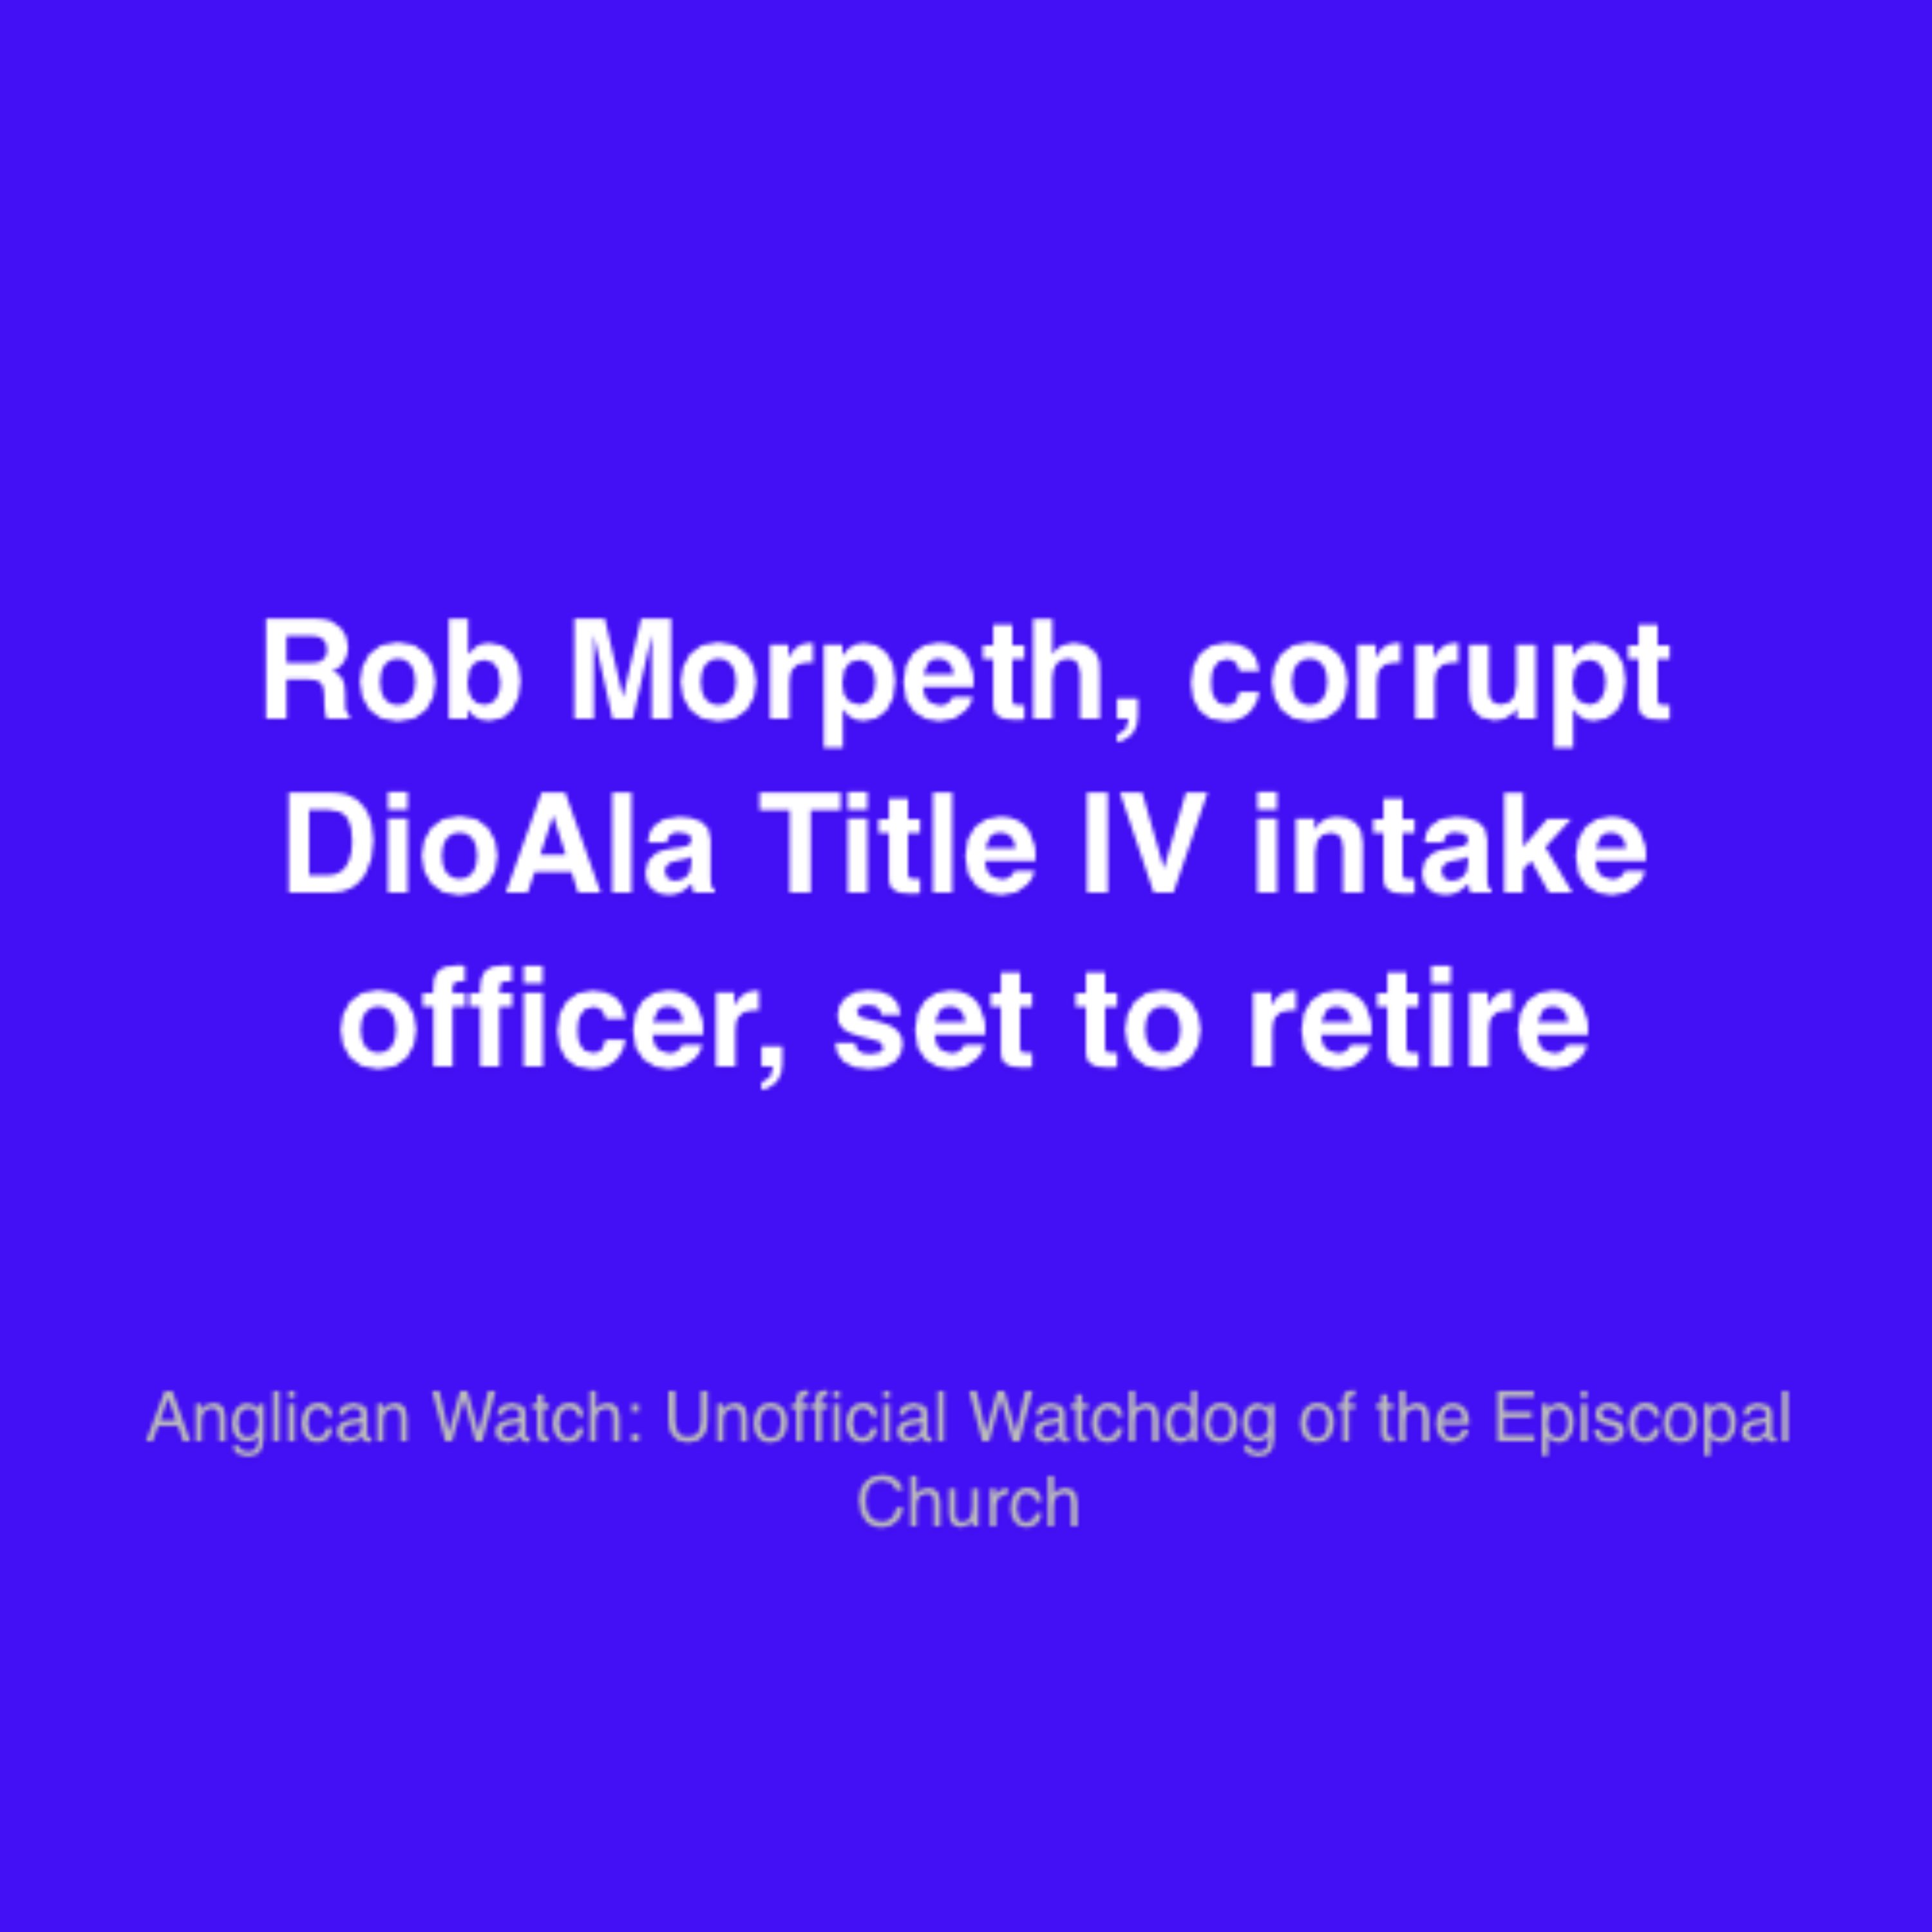 Rob Morpeth, corrupt DioAla Title IV intake officer, set to retire